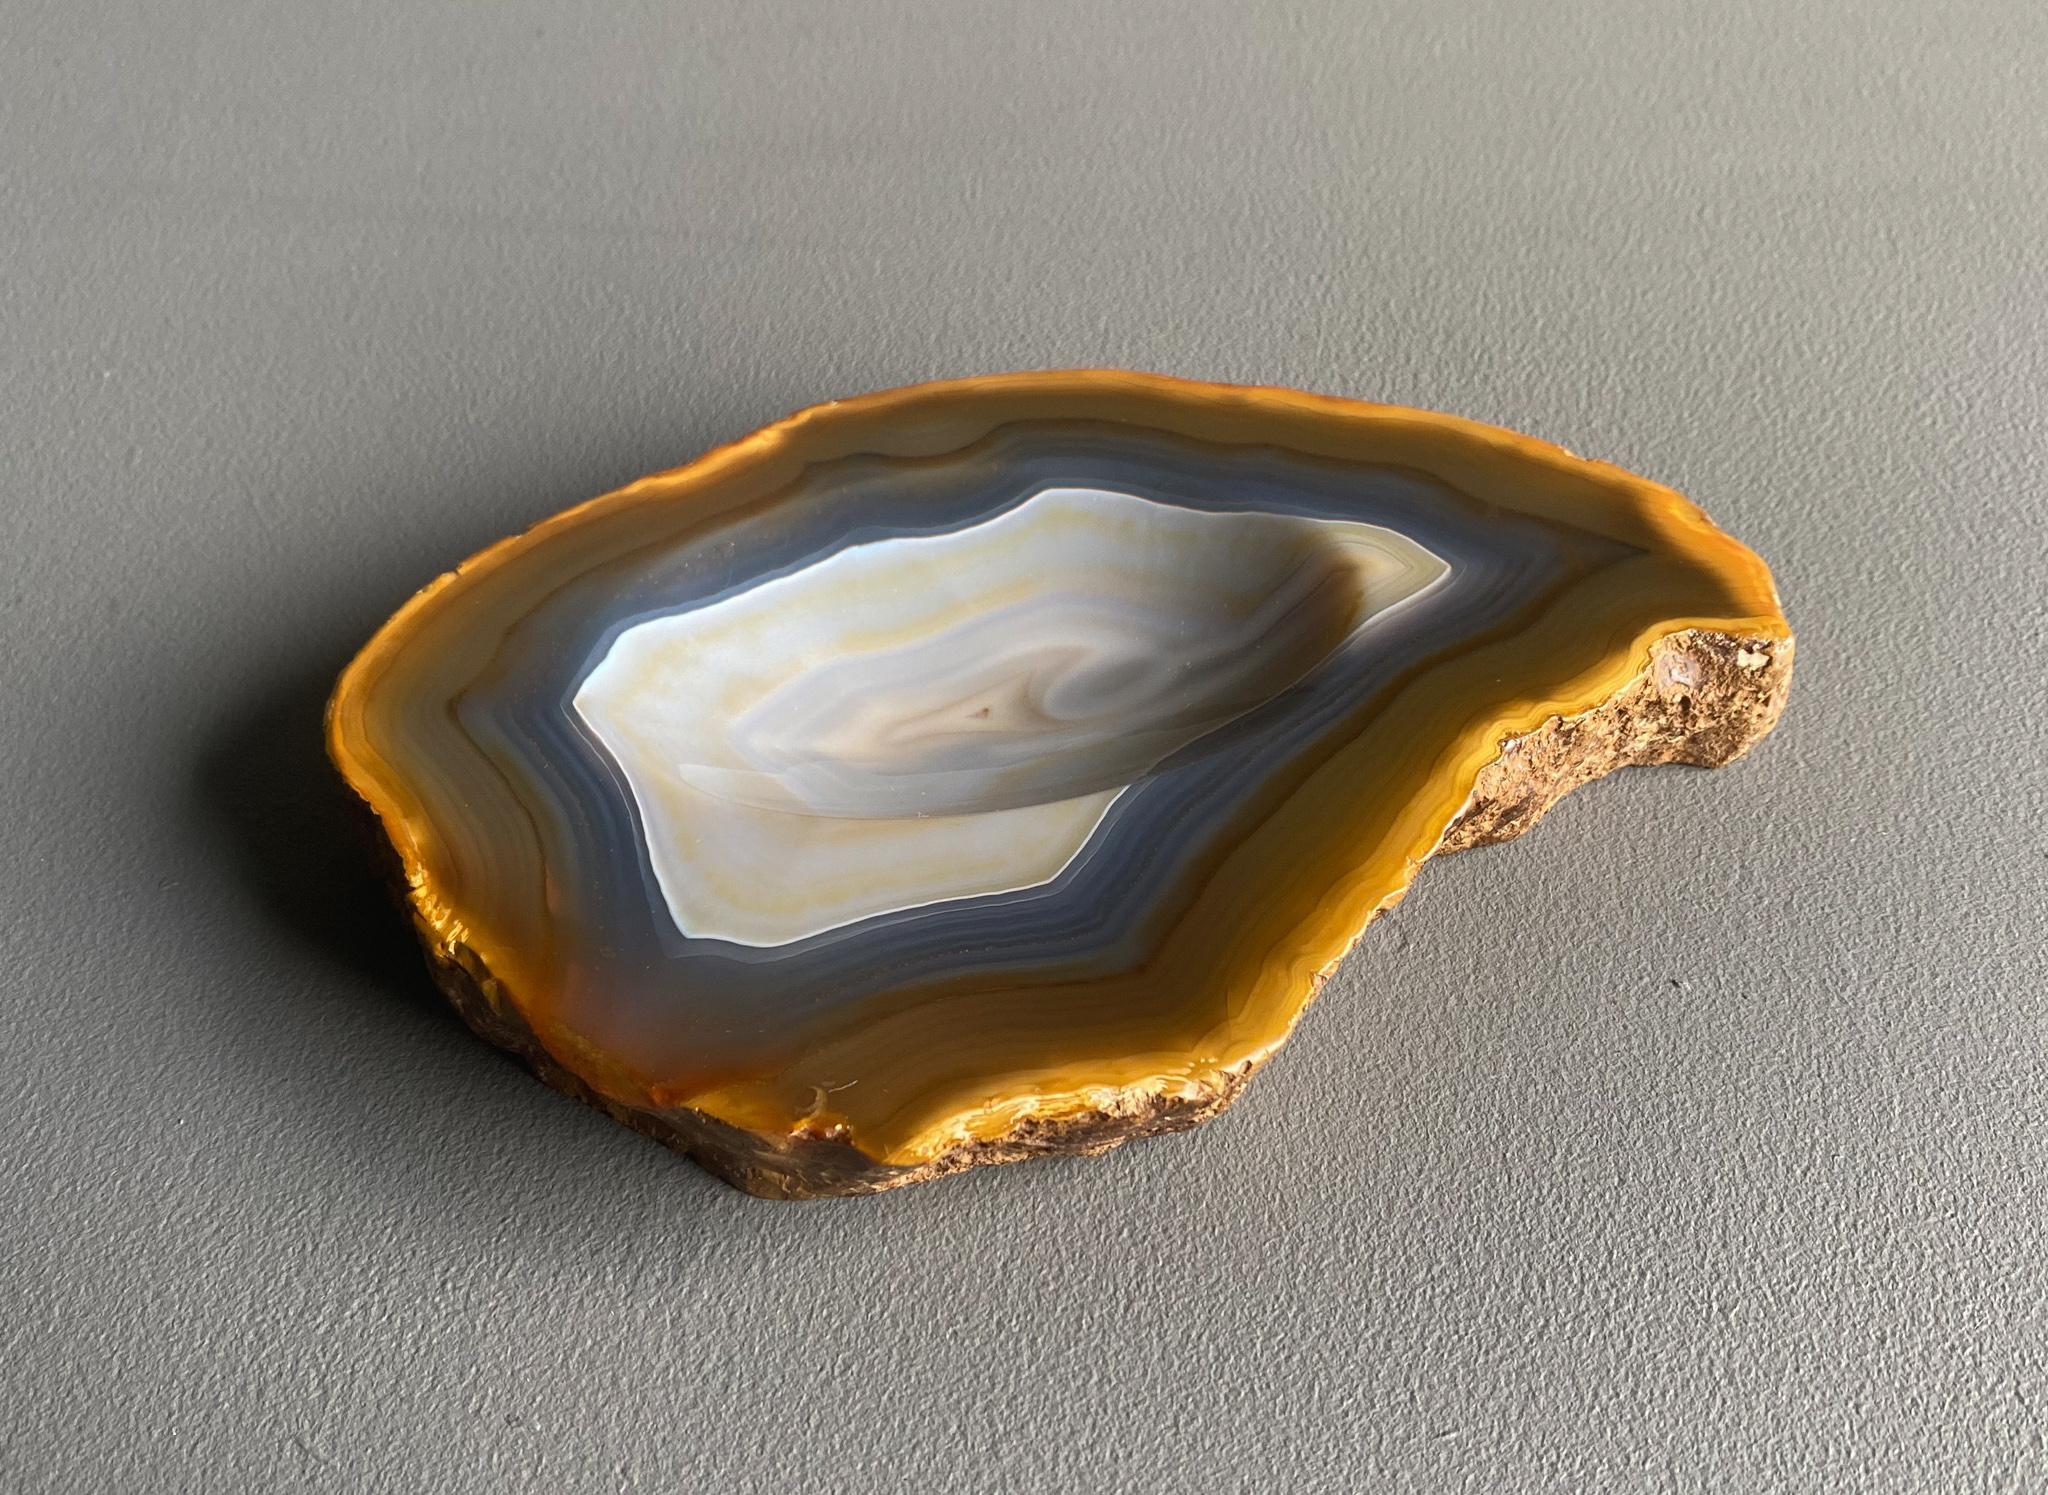 Polished Agate Geode Stone Bowl, circa 1960 For Sale 5